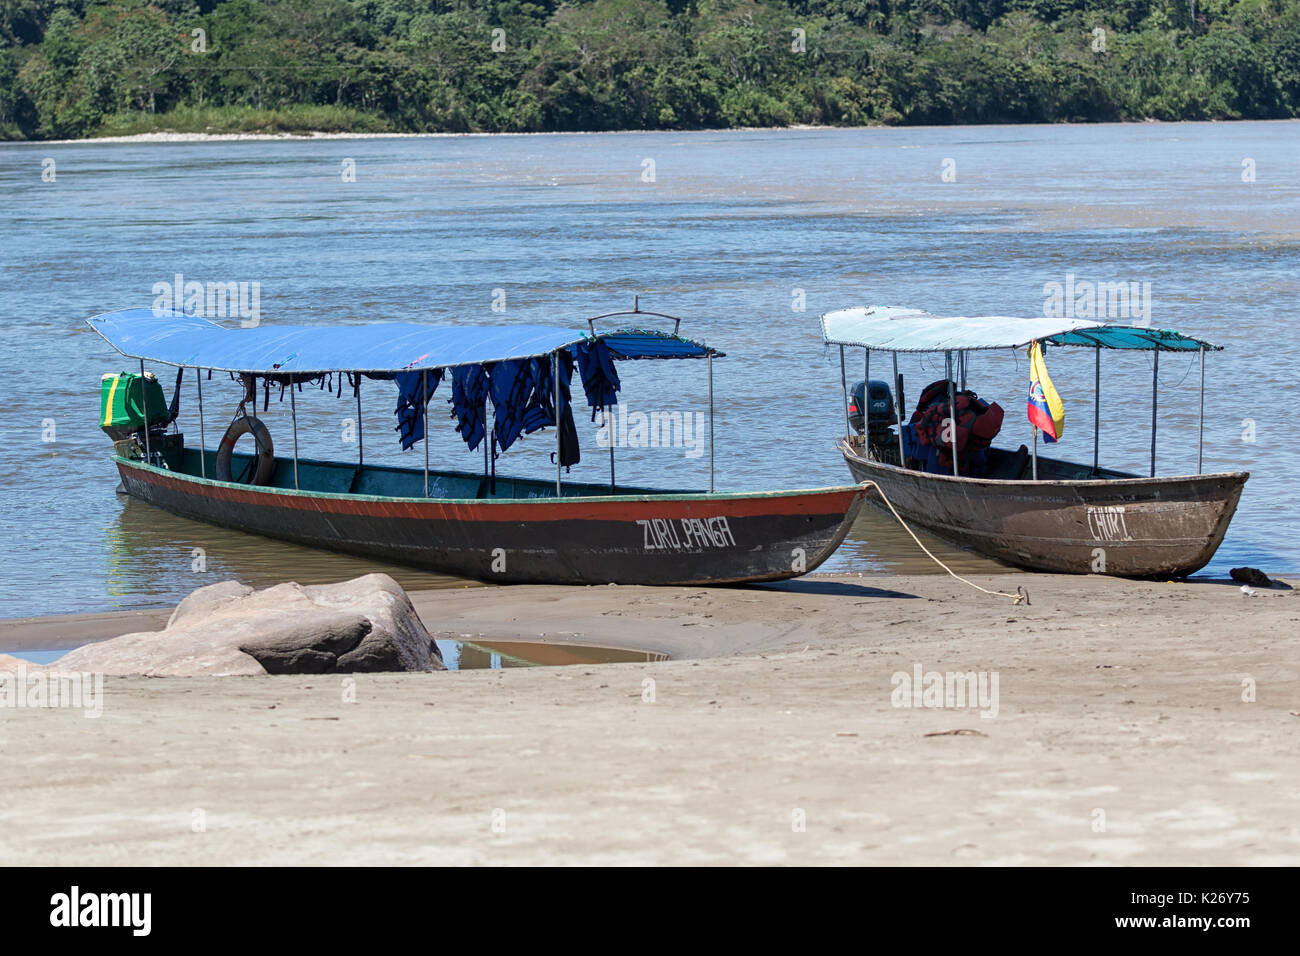 June 6, 2017 Misahualli, Ecuador:  boats are used as a main transportation on river Napo in the Amazon area of the country Stock Photo